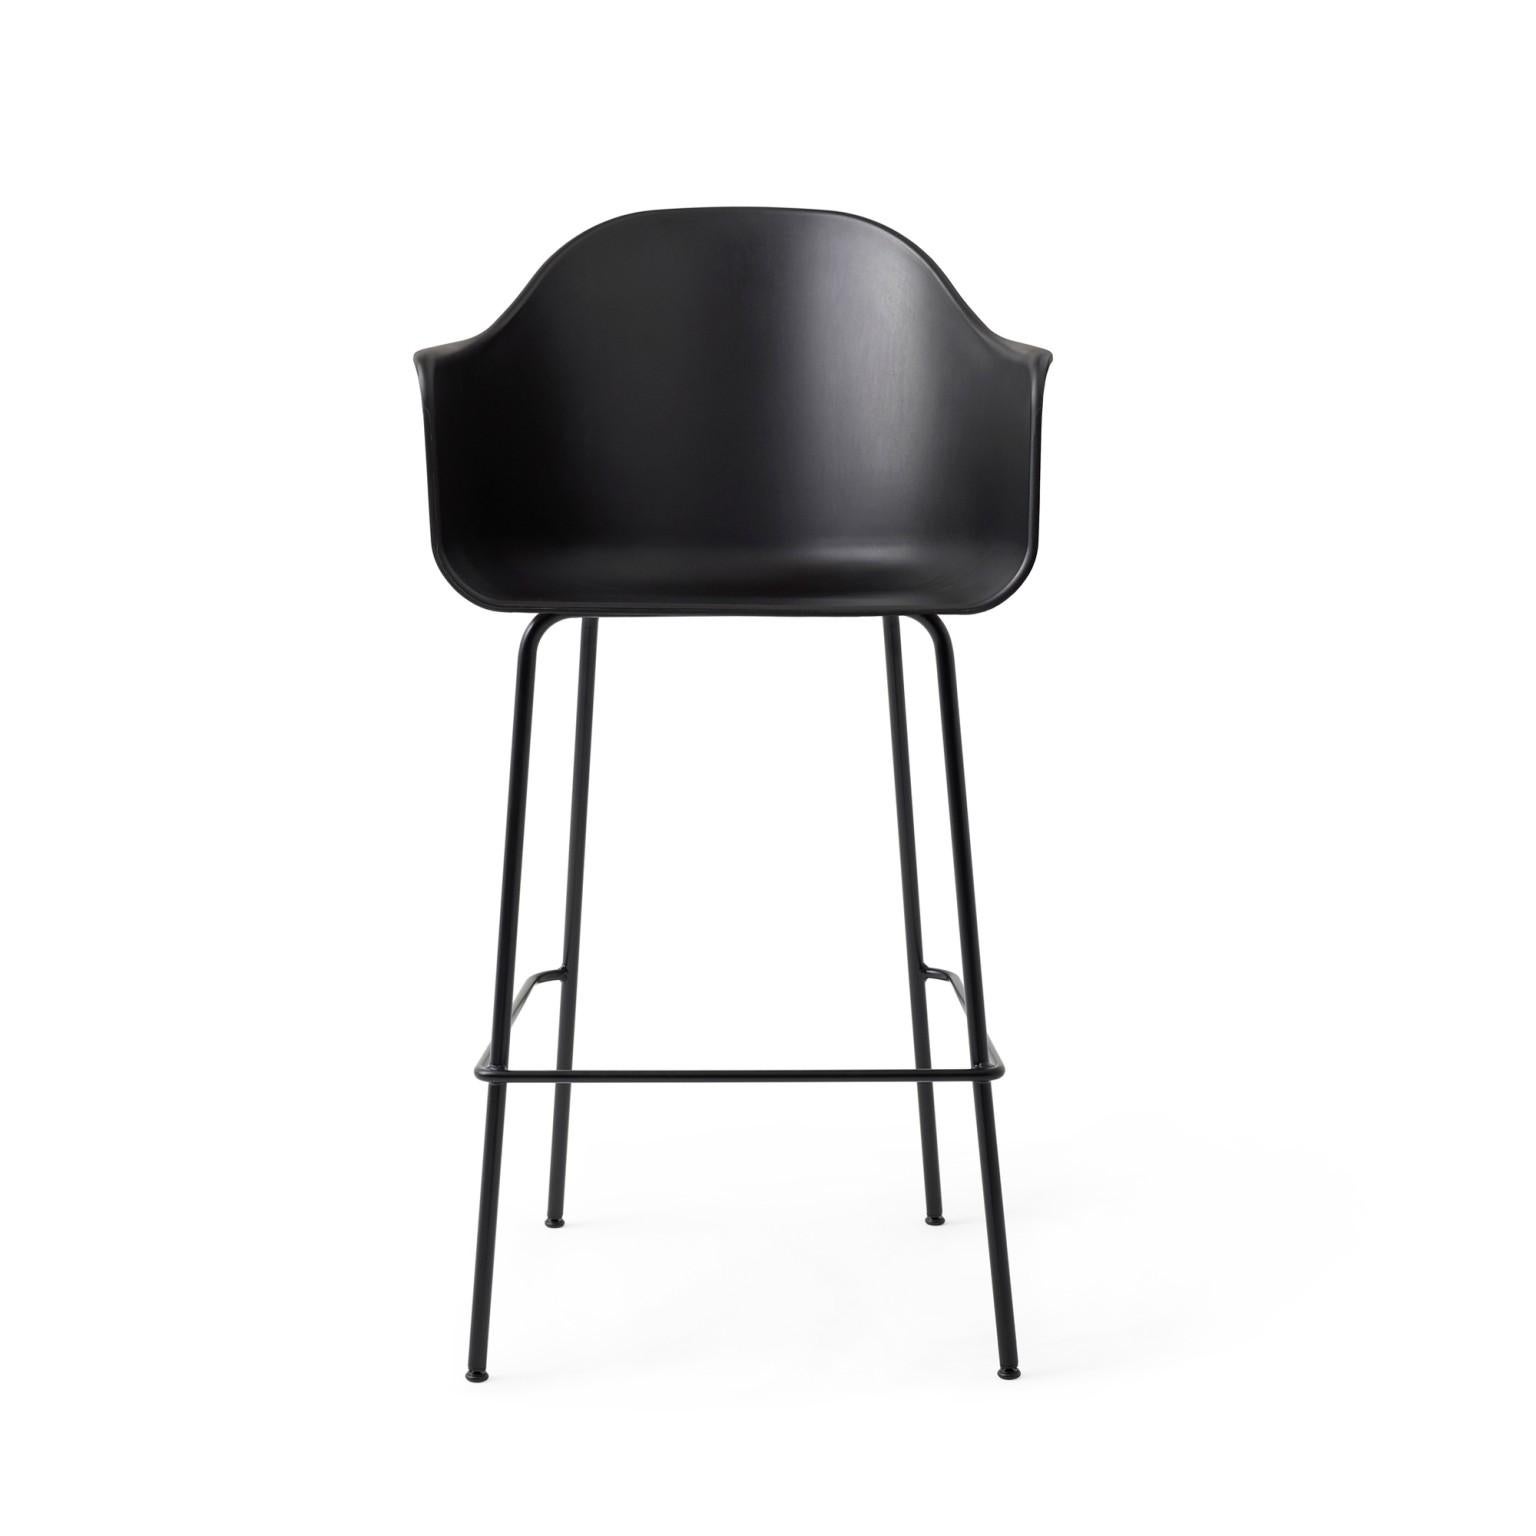 Originally conceived to serve a broad range of needs at menu space, menu’s showroom or creative co-working space/café in Copenhagen, the Harbour chair design has expanded to respond to all kinds of demands in private and public spaces. The latest